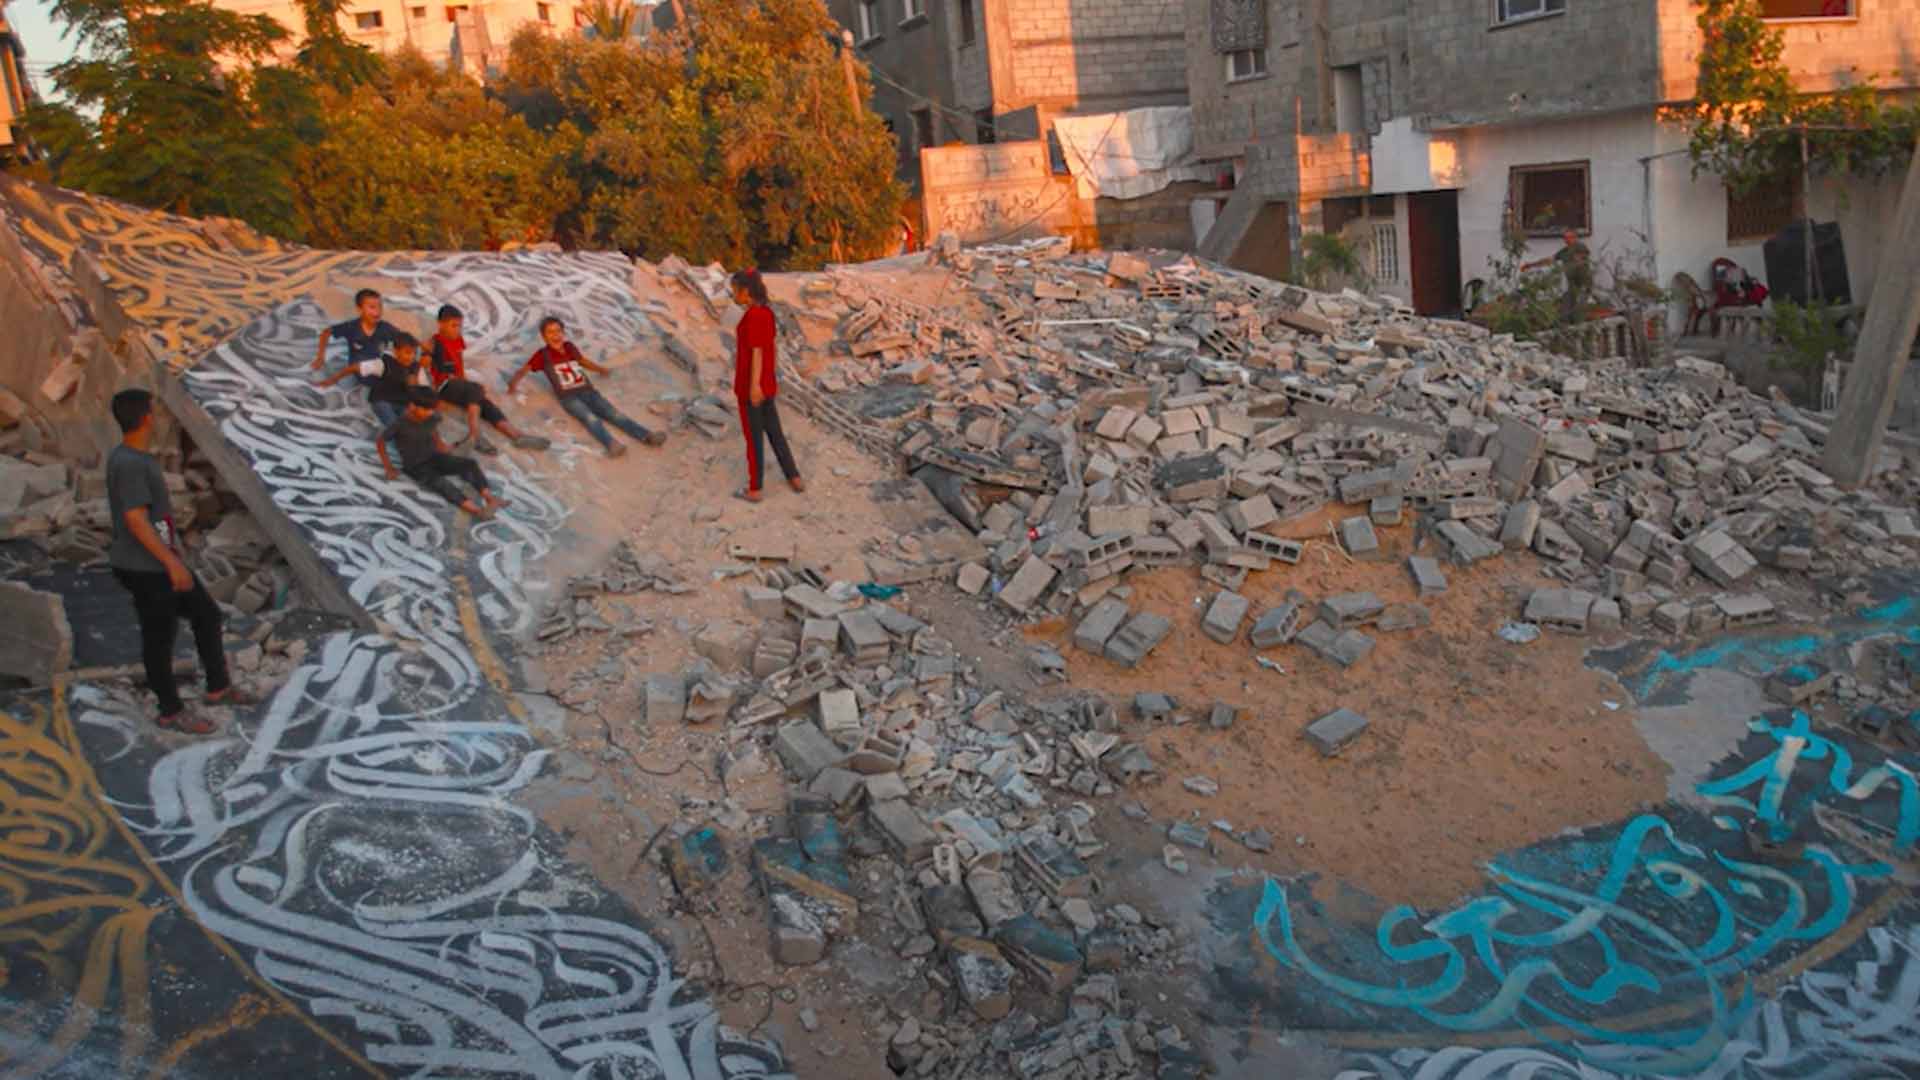 A group of young children lie on the ground with rubble around them, parts of the floor have been covered in art.